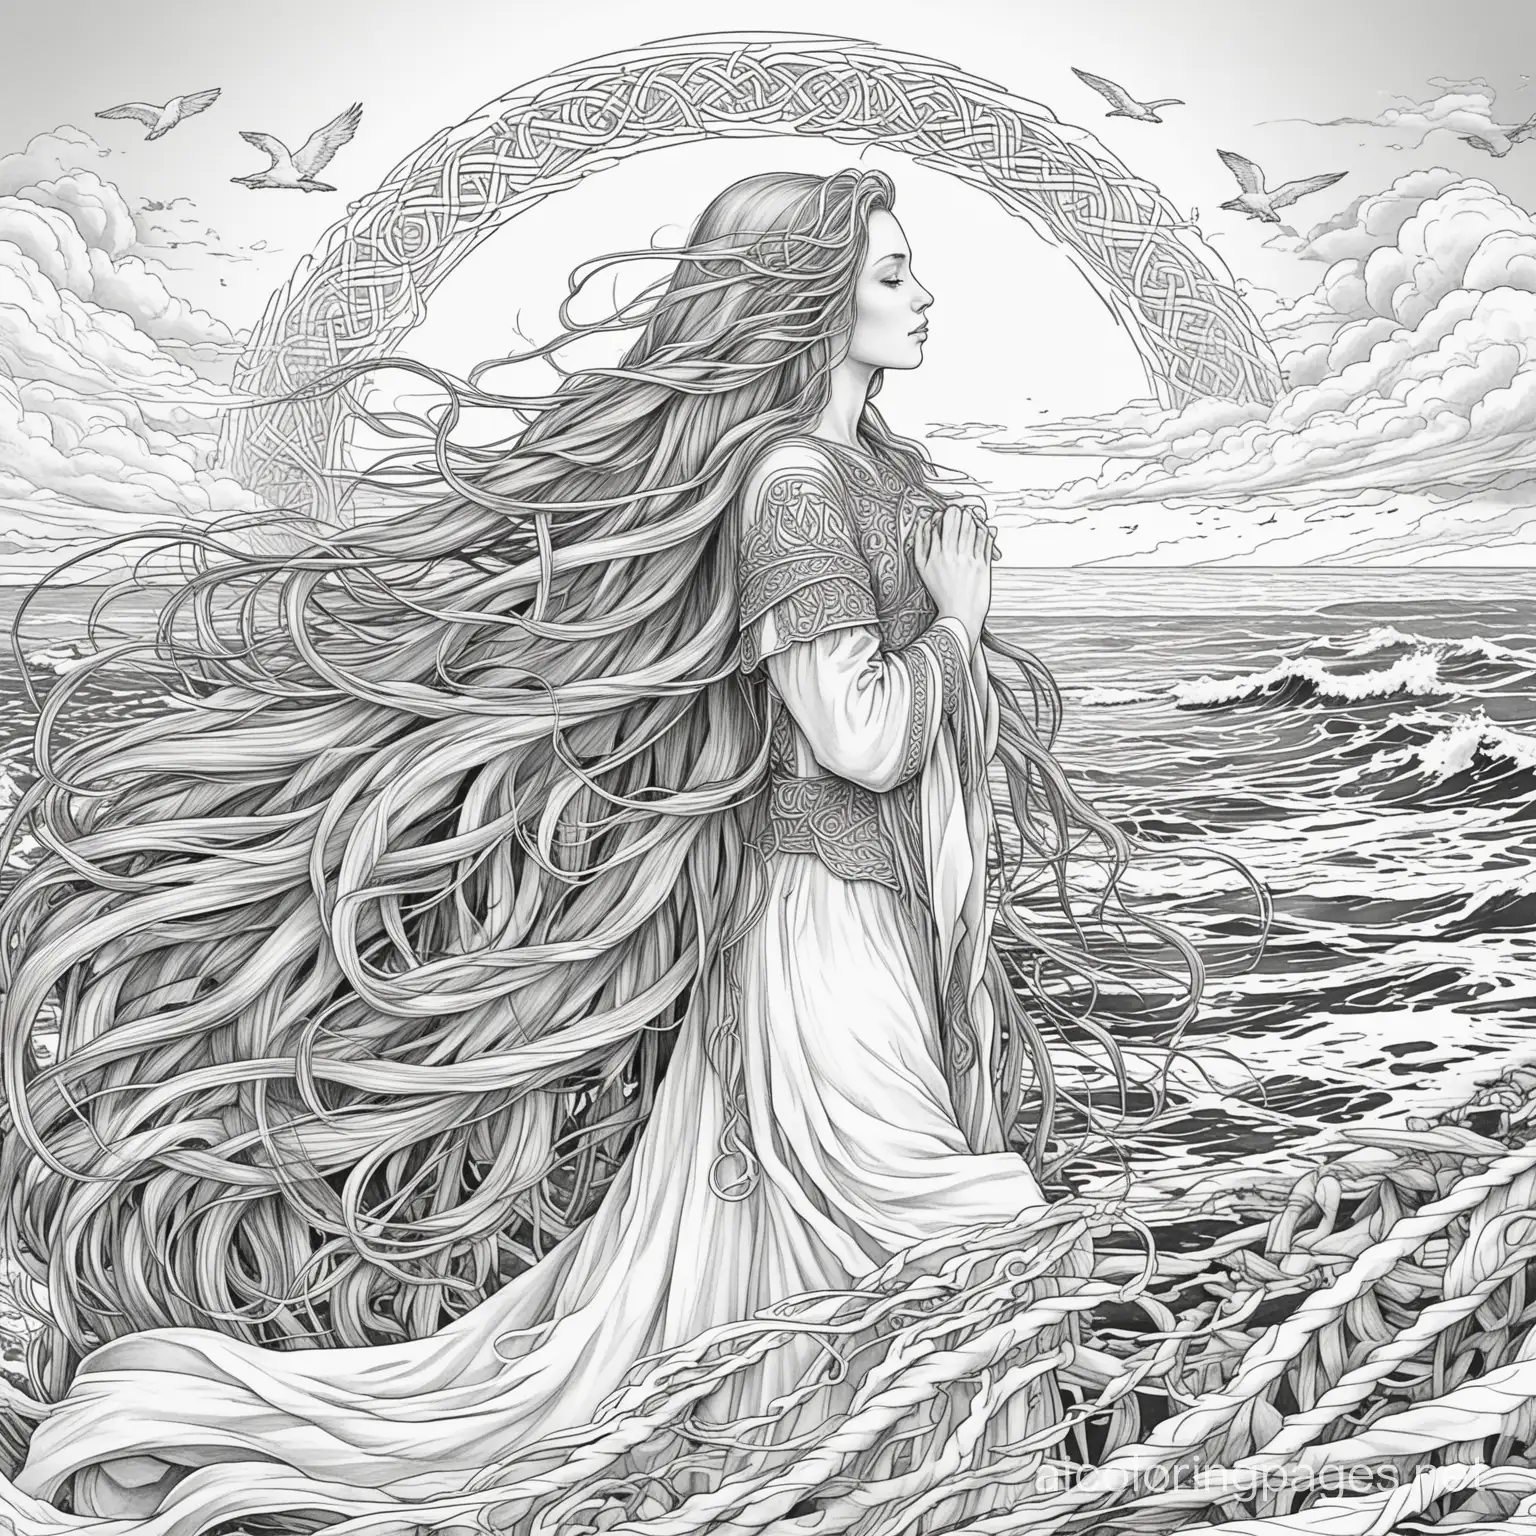 Celtic holy saint with long hair overlooking ocean hair blowing in wind, Coloring Page, black and white, line art, white background, Simplicity, Ample White Space. The background of the coloring page is plain white to make it easy for young children to color within the lines. The outlines of all the subjects are easy to distinguish, making it simple for kids to color without too much difficulty